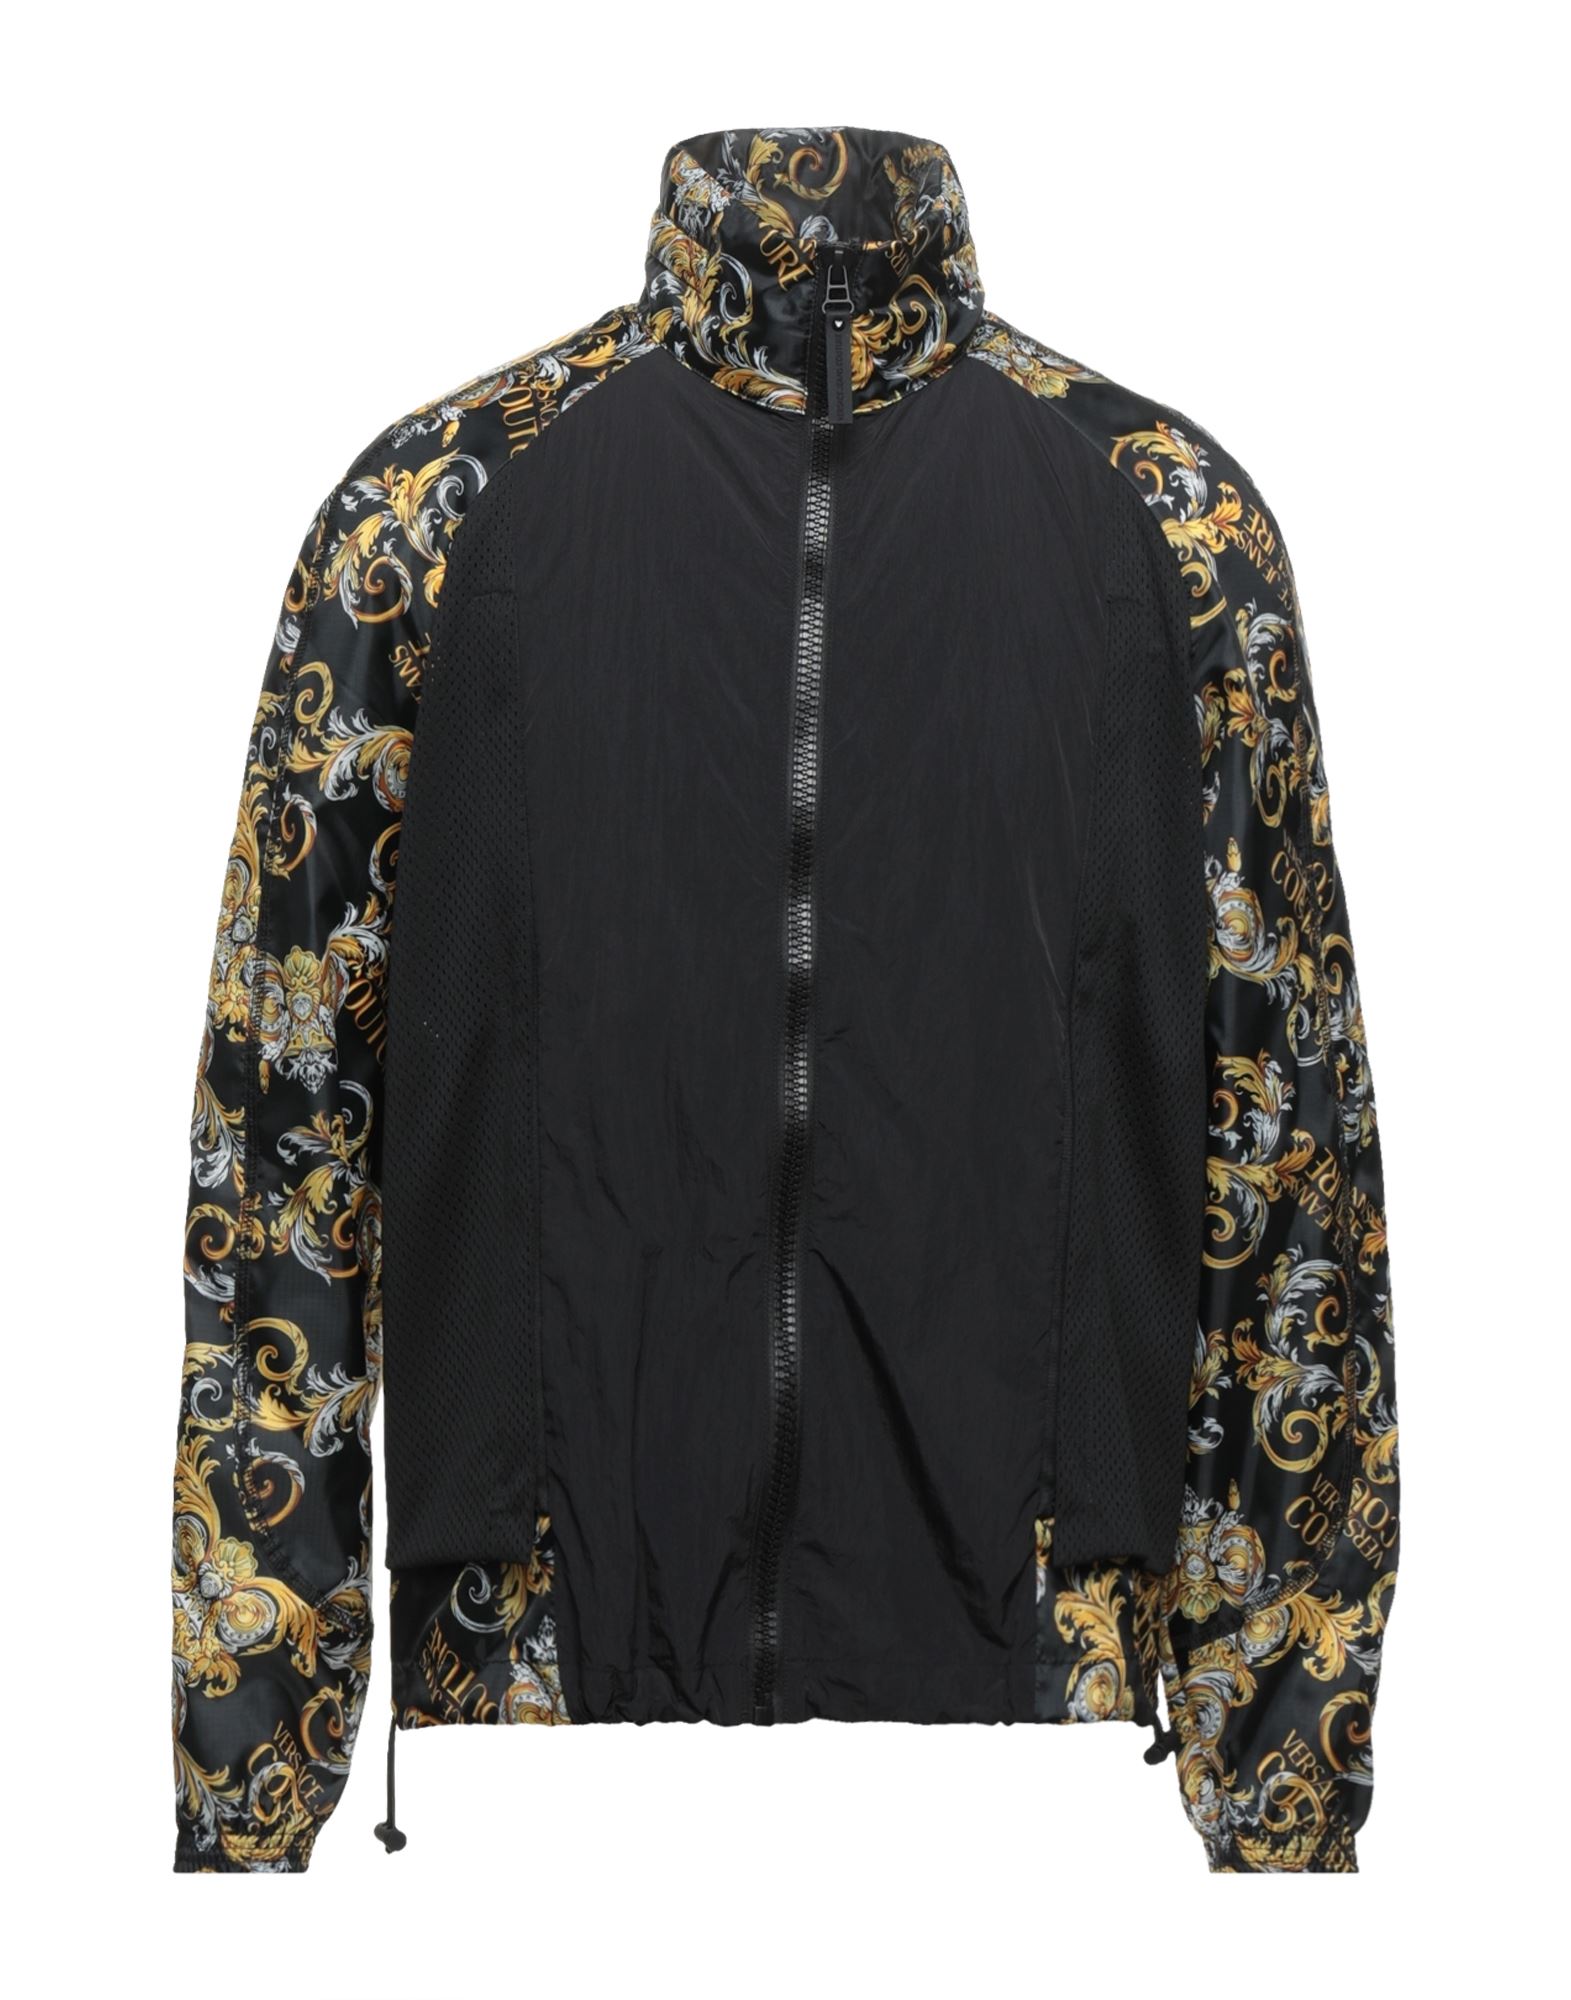 VERSACE JEANS COUTURE Jackets for Men | ModeSens